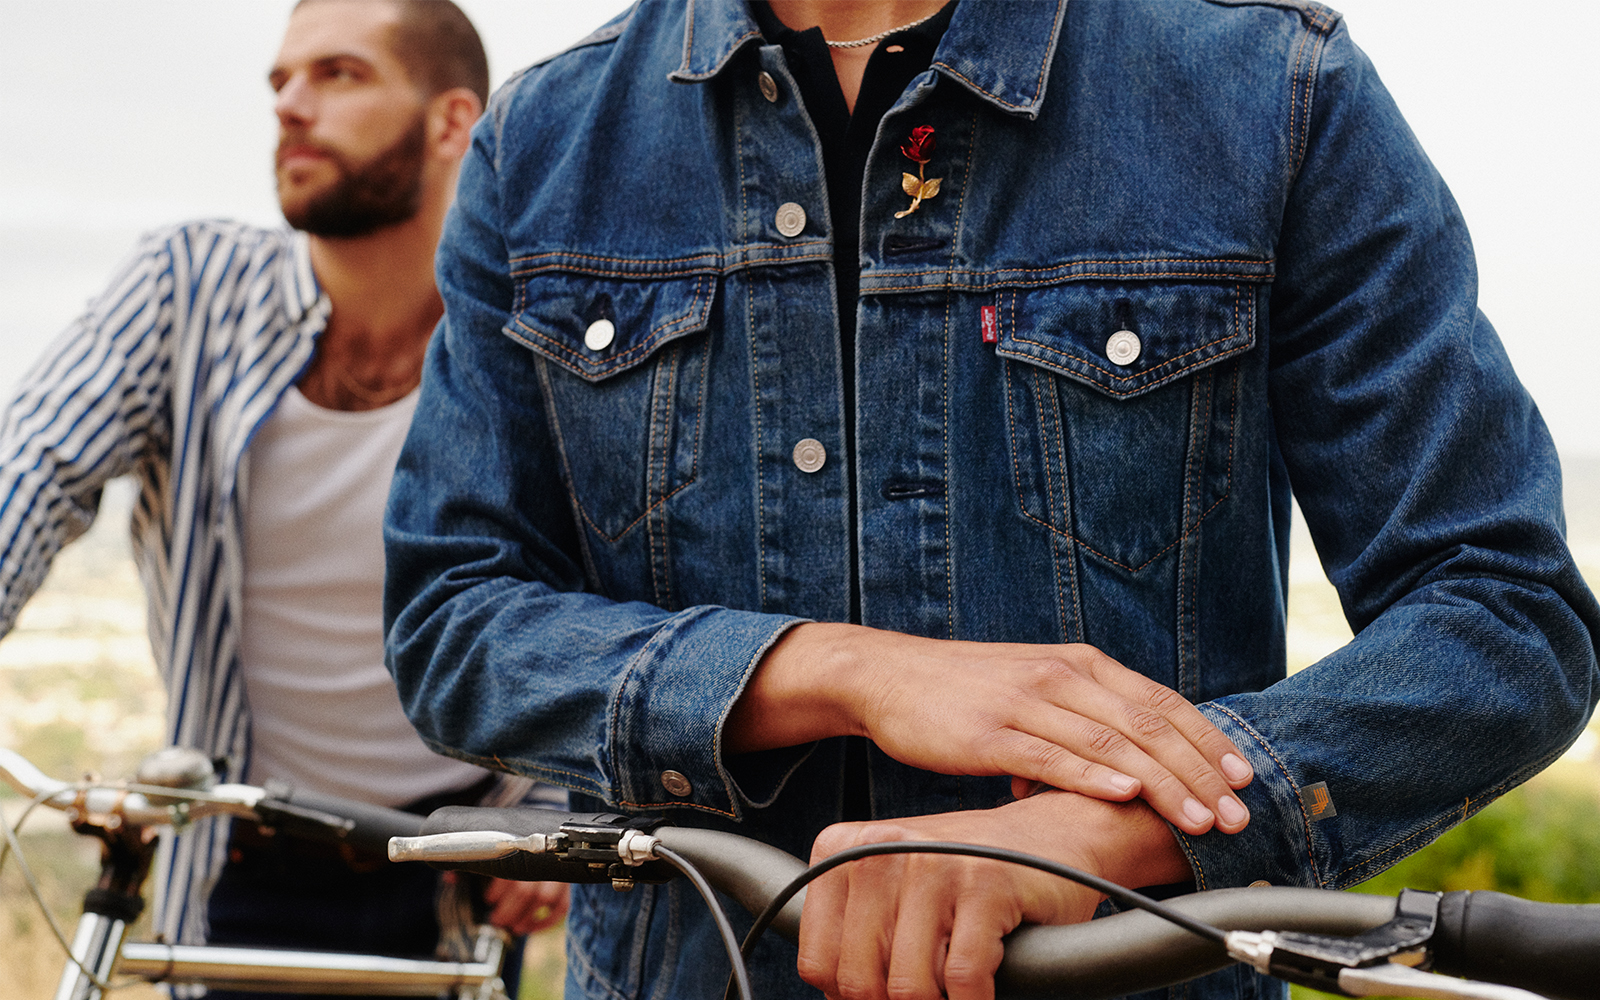 Google and Levi's jeans: New kind of wearable tech